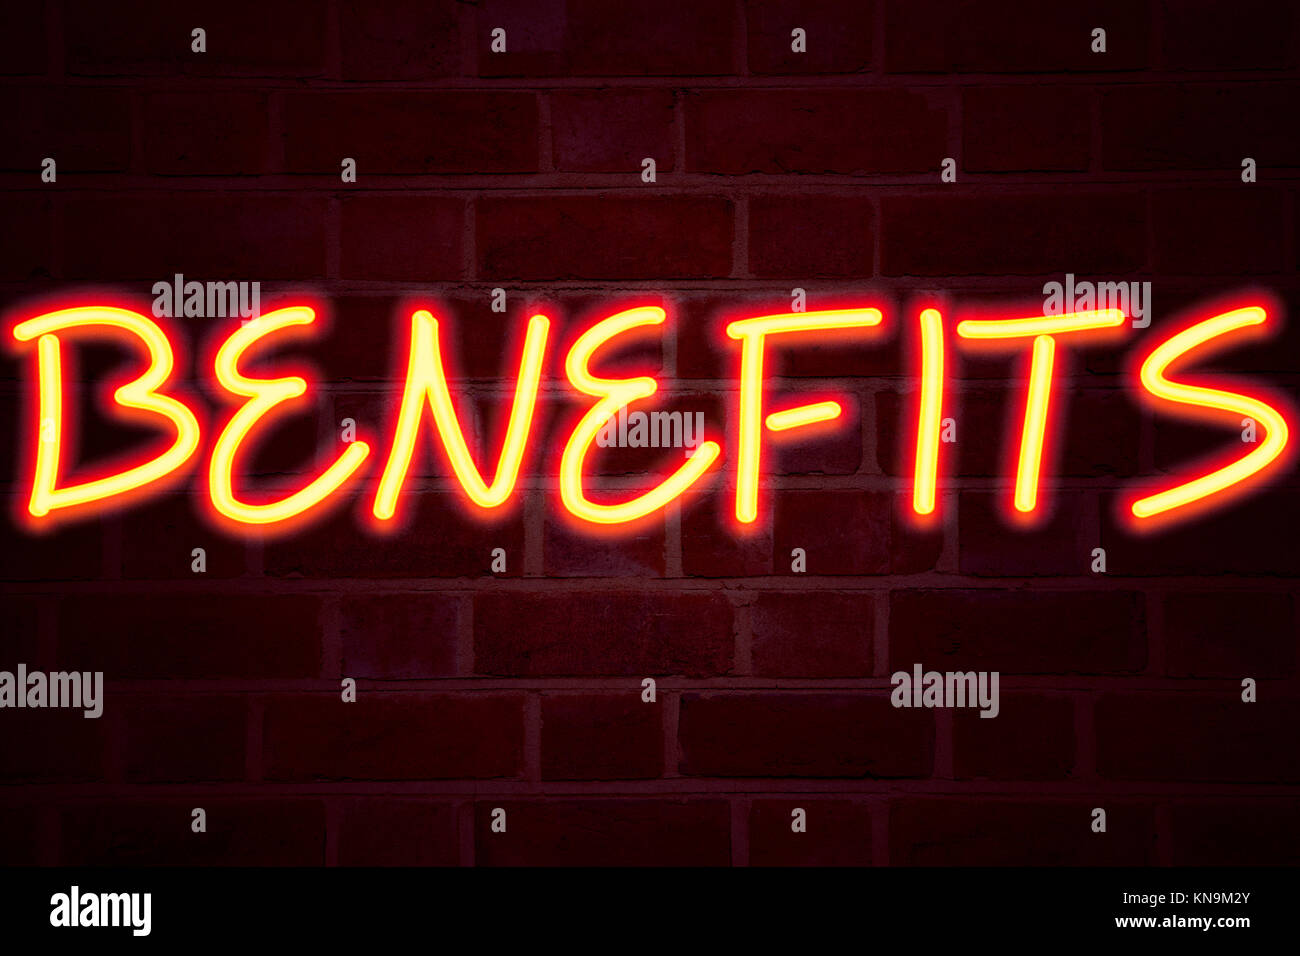 Benefits Neon Sign On Brick Wall Background Fluorescent Neon Tube Sign On Brickwork Business 